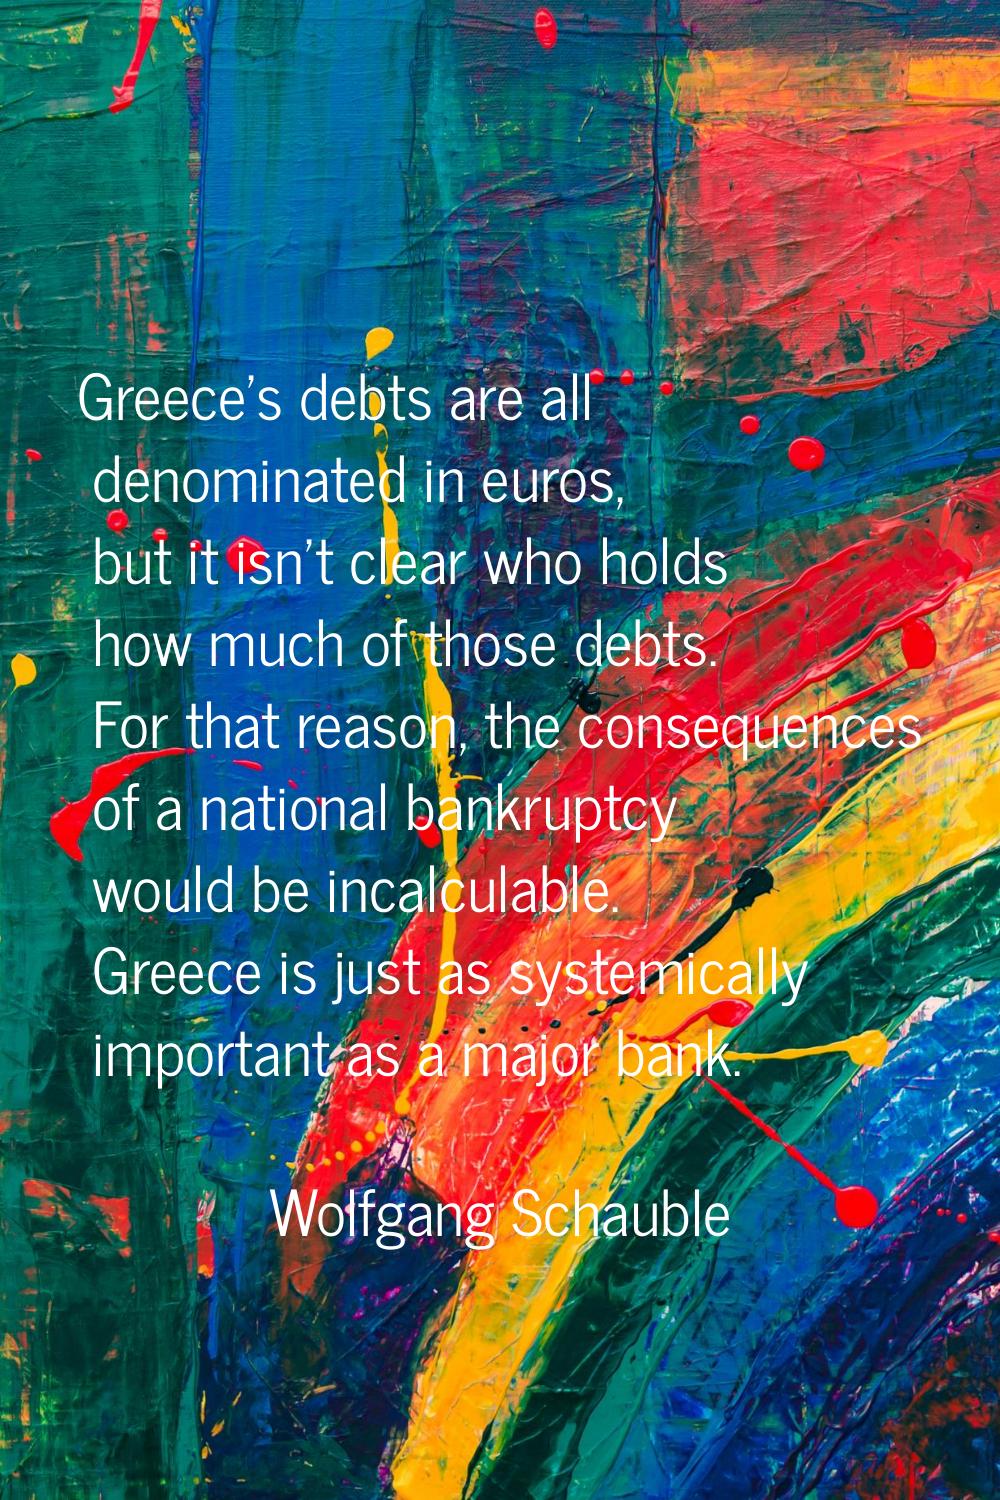 Greece's debts are all denominated in euros, but it isn't clear who holds how much of those debts. 